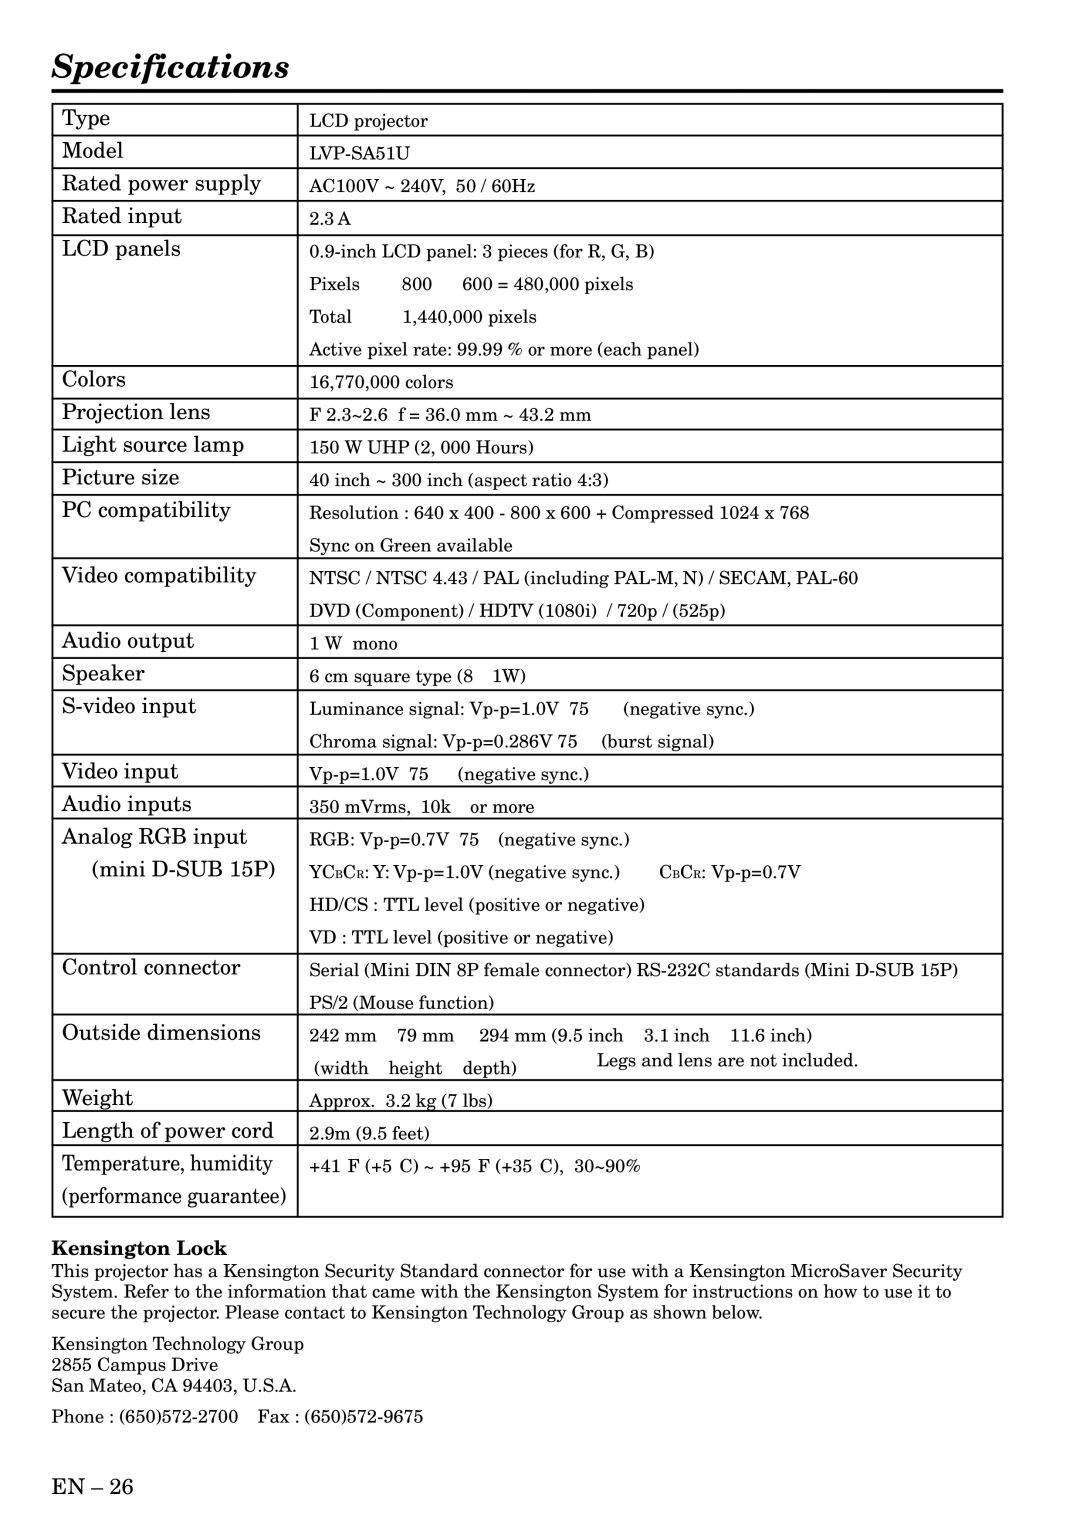 Mitsubishi Electronics SA51 user manual Specifications, Rated input LCD panels 